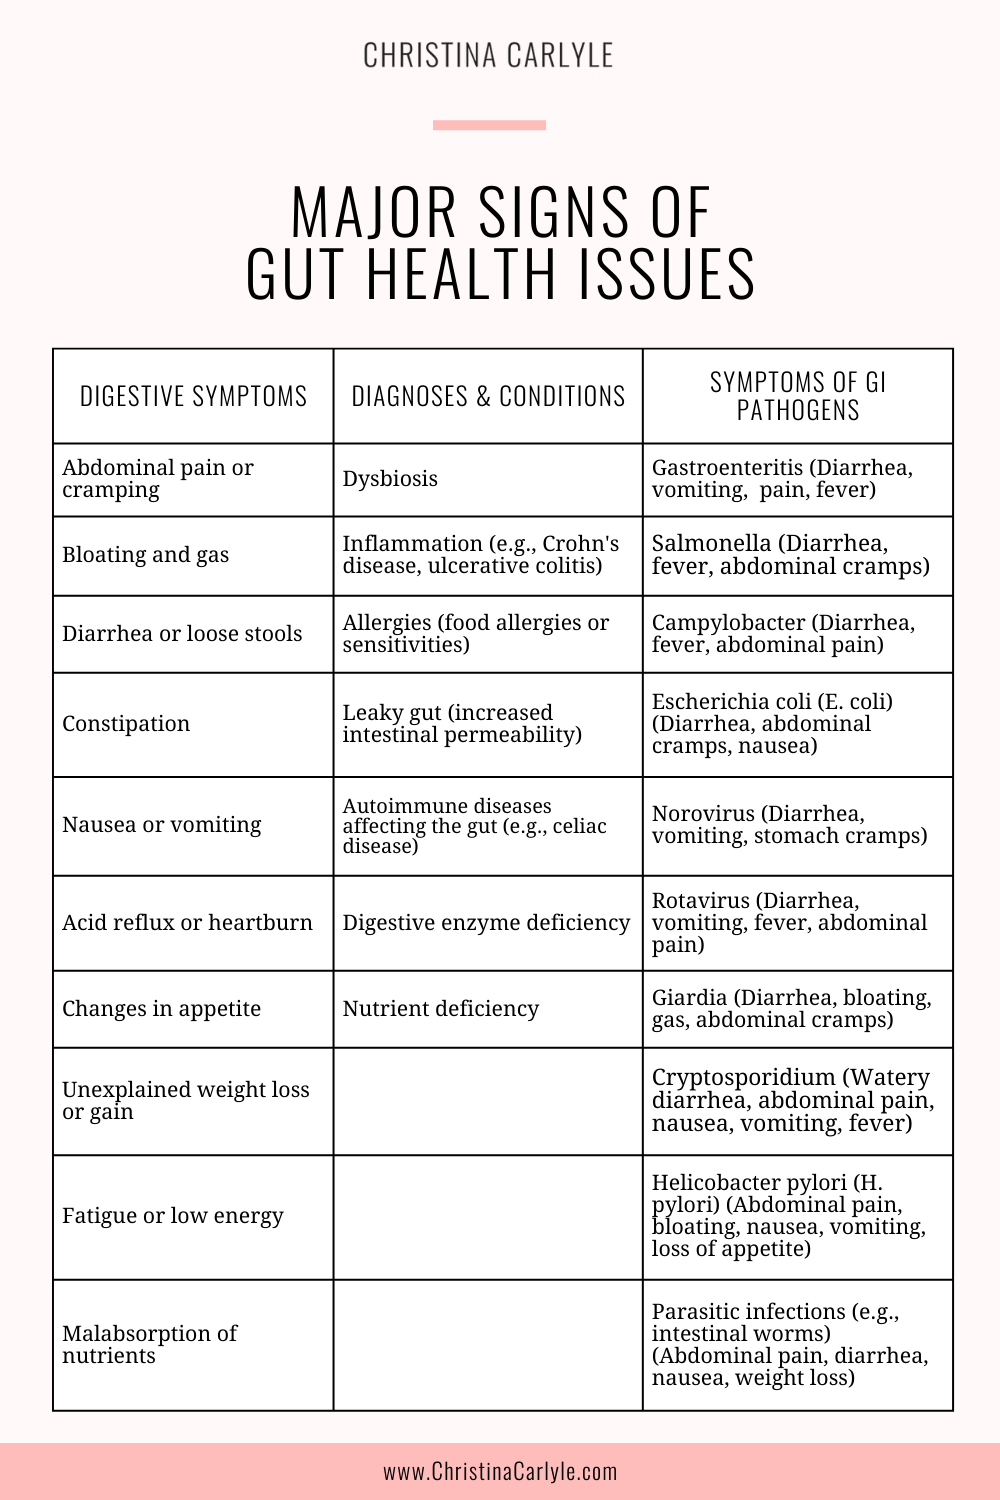 a chart of different digestive, diagnostic, and pathogen symptoms that occur when gut health is compromised and text that says Major Signs of Gut Health Issues